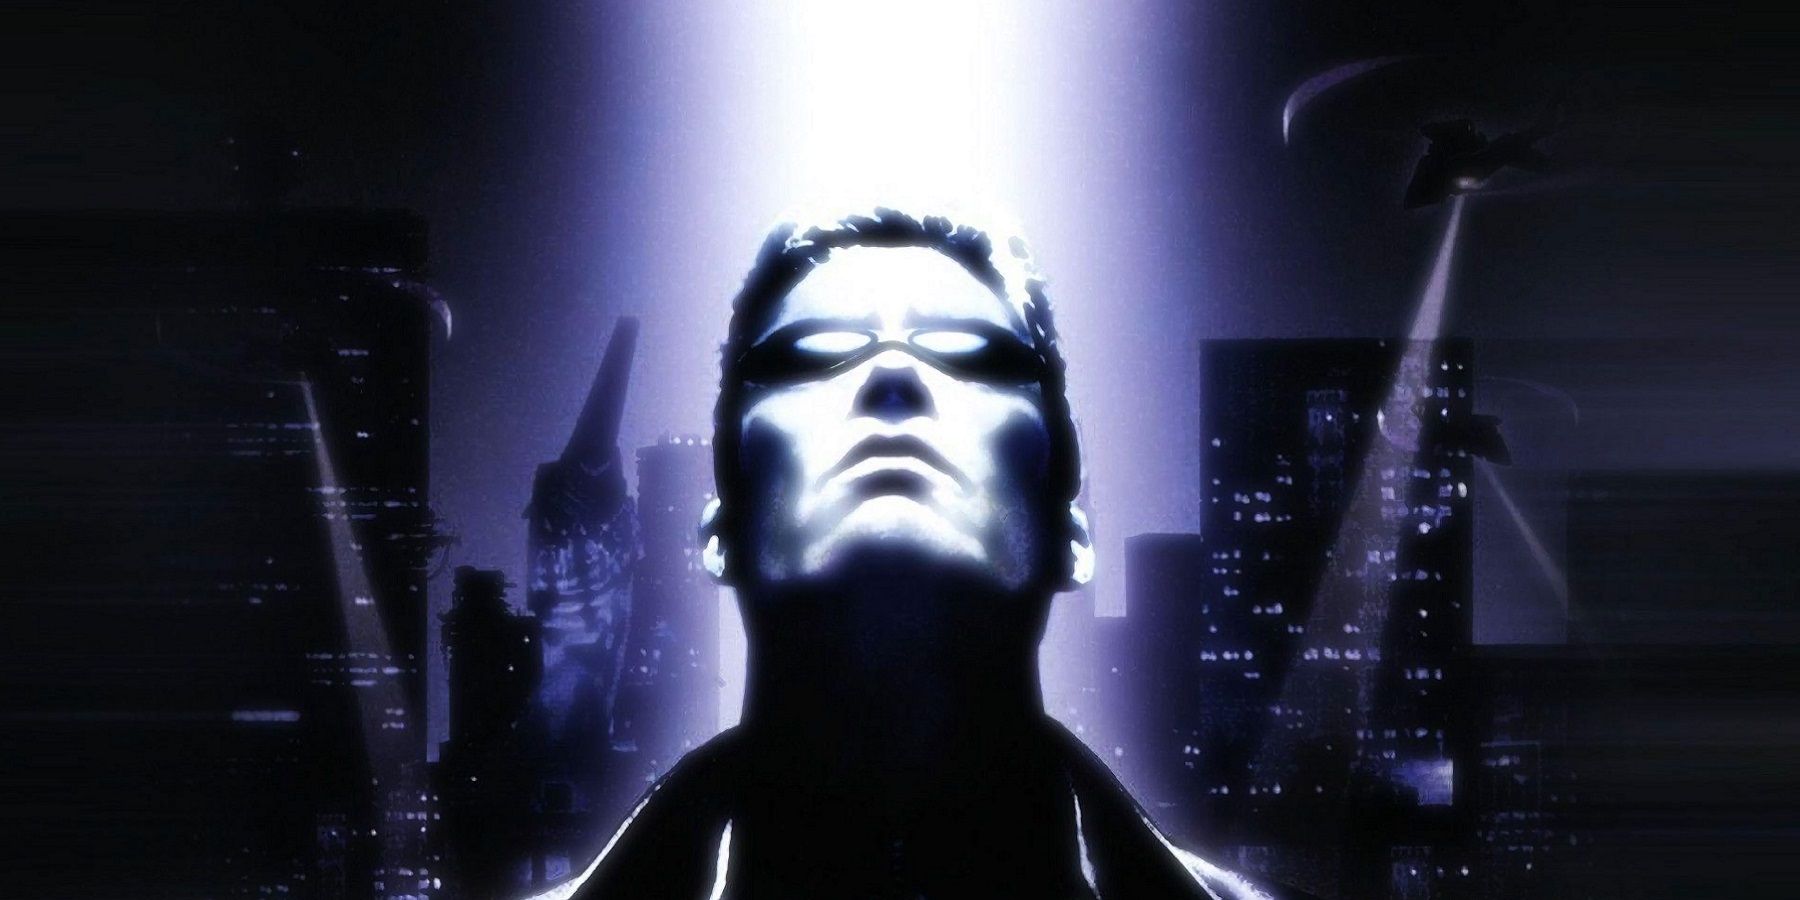 The front cover of the original Deus Ex showing J.C. Denton looking up at a light beaming down.